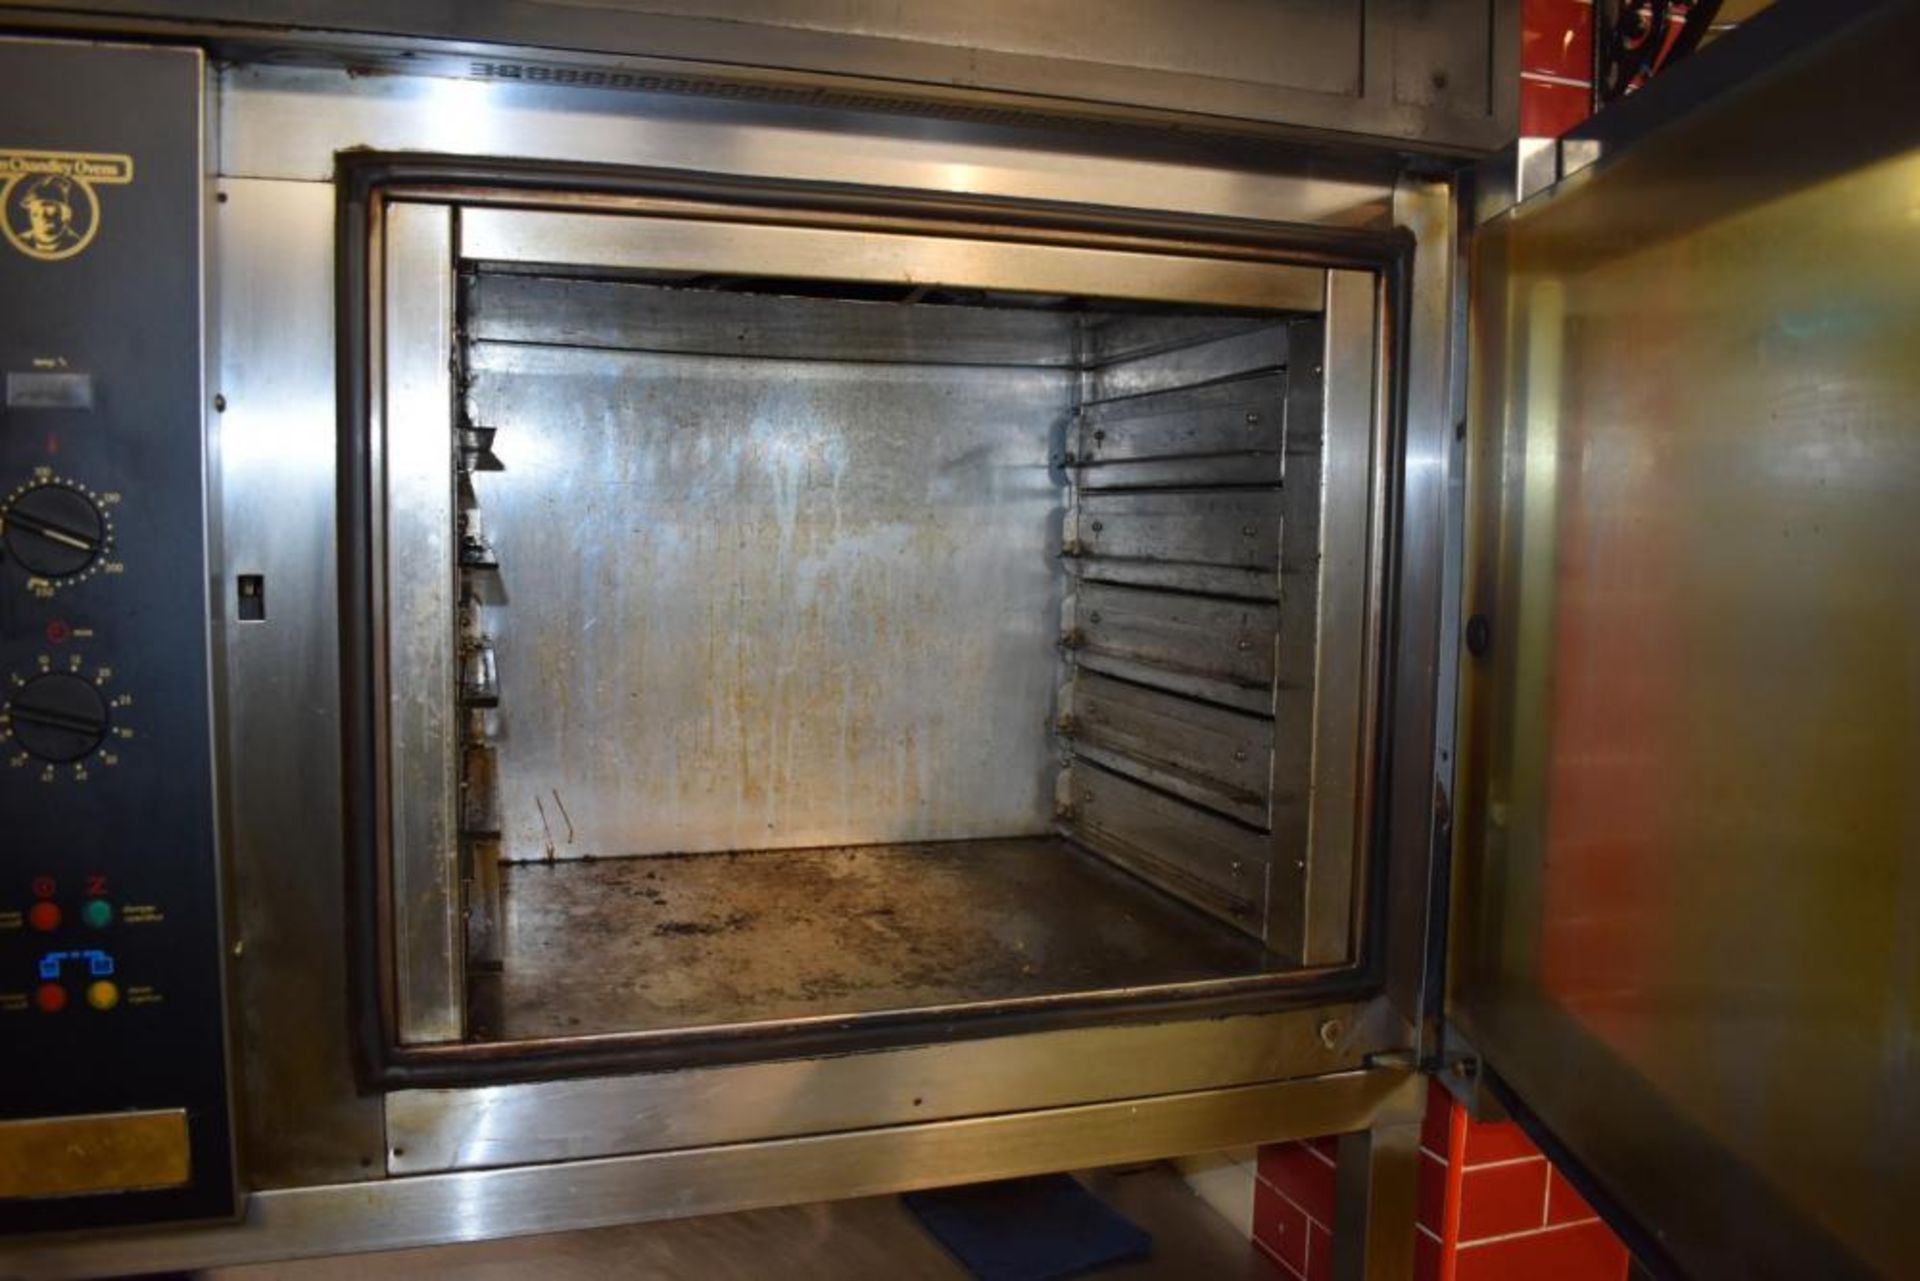 1 x Tom Chandley Double C5 60X40 Pie Oven With Stainless Steel Baking Tray Prep Bench - CL455 - Ref - Image 2 of 18